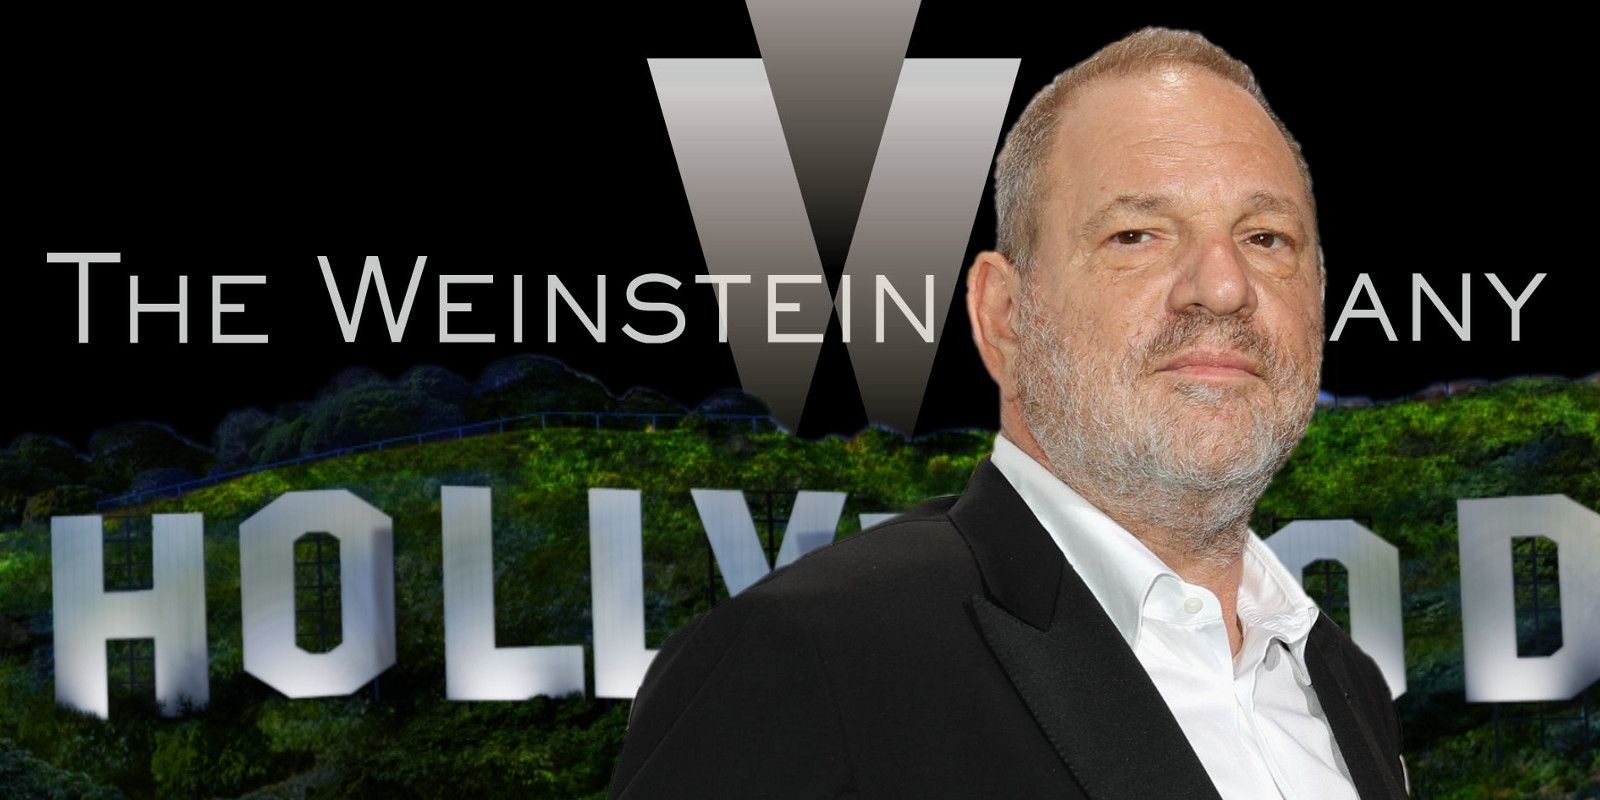 Harvey Weinstein's Name Should Stay on All His Movies